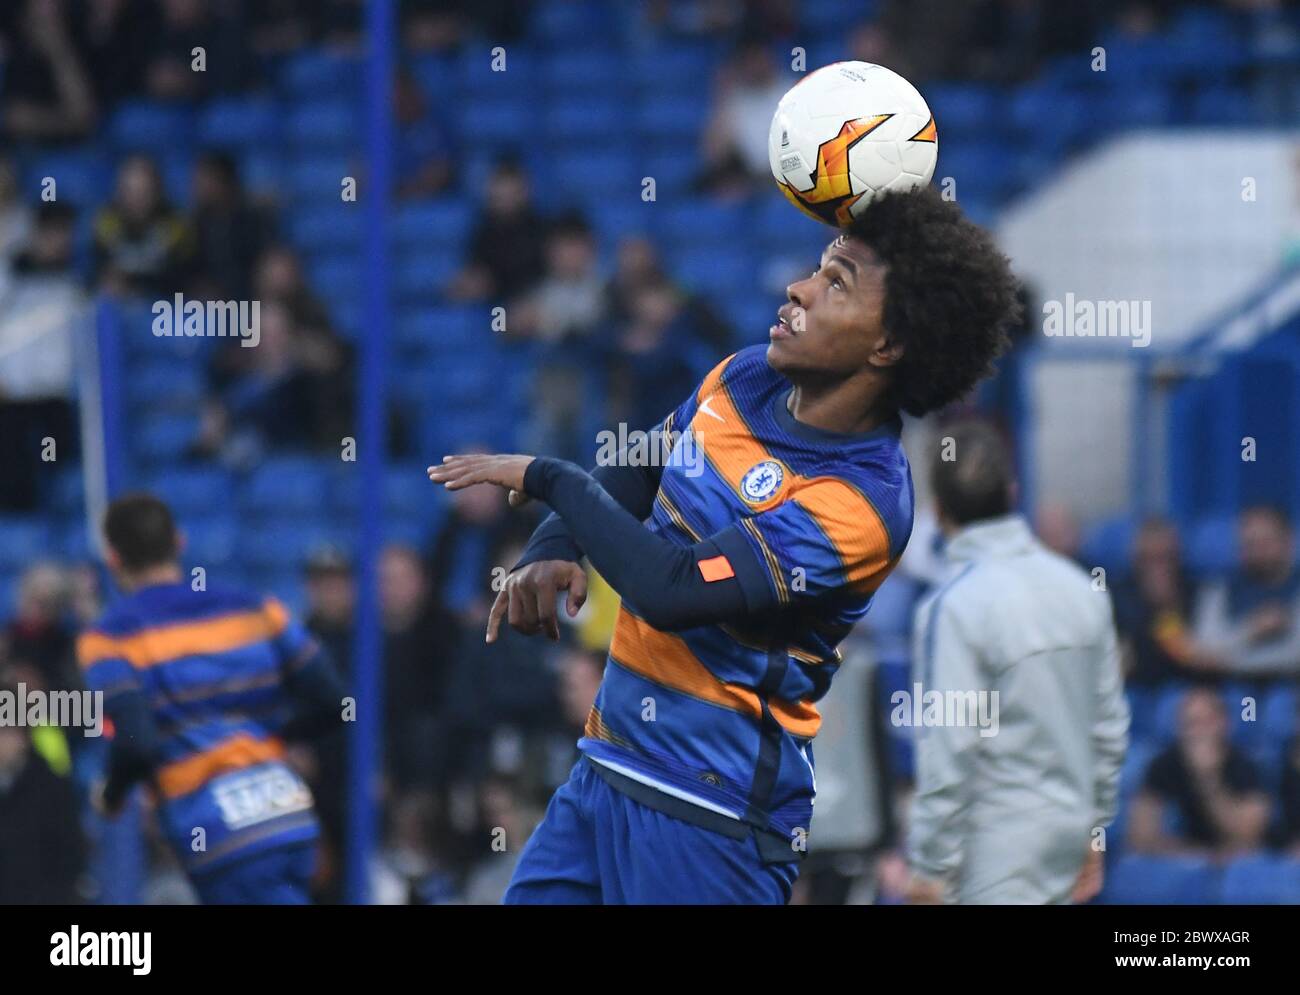 LONDON, ENGLAND - APRIL 18, 2019: Willian Borges da Silva of Chelsea pictured prior to the second leg of the 2018/19 UEFA Europa League Quarter-Finals game between Chelsea FC (England) and SK Slavia Praha (Czech Republic) at Stamford Bridge. Stock Photo